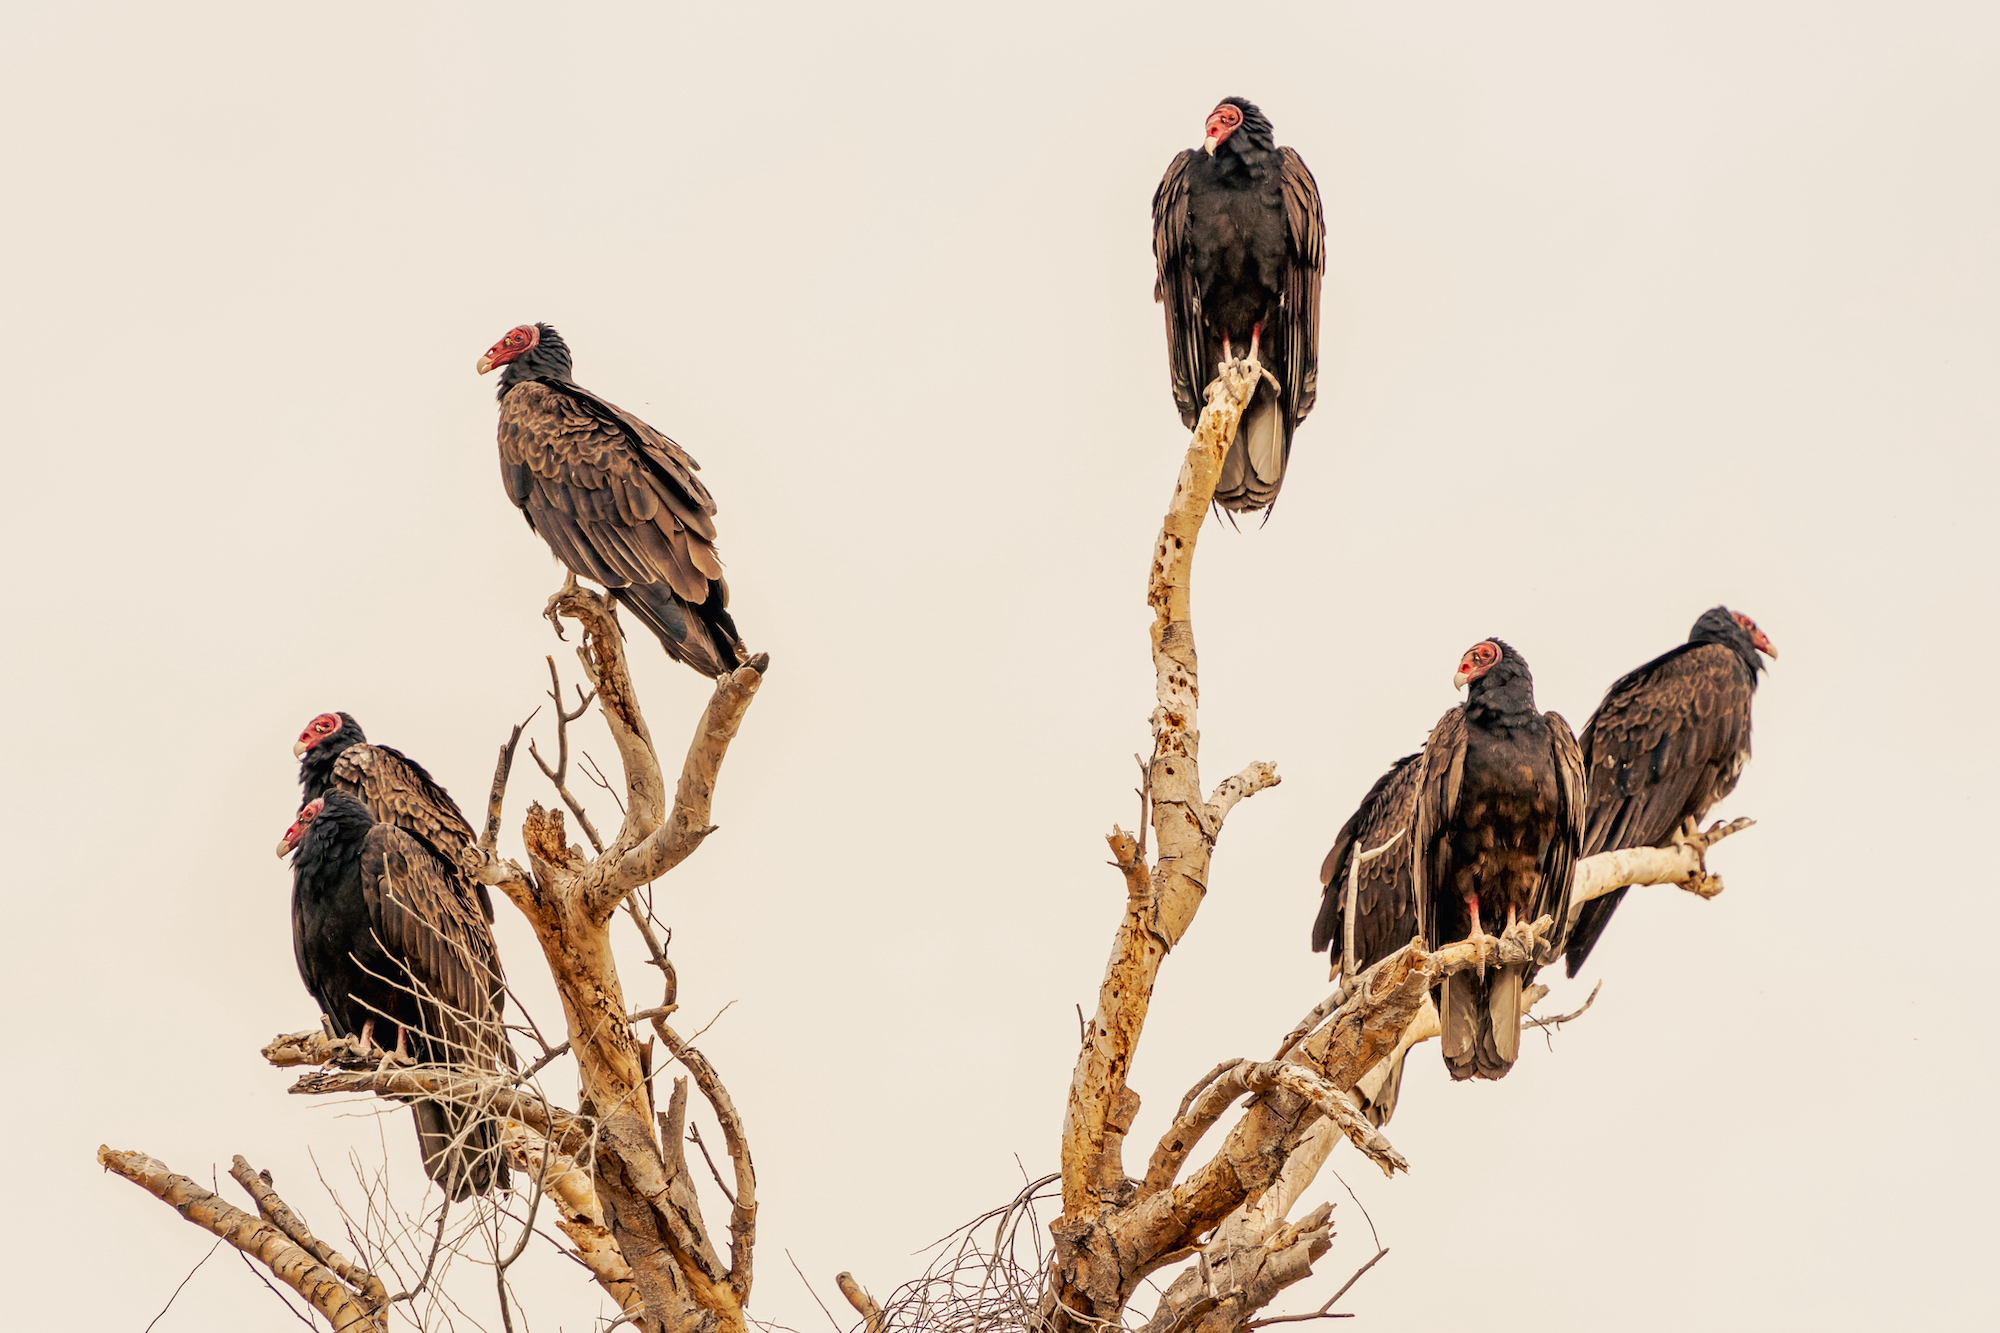 Seven turkey vultures roost in the leafless branches of a tree against